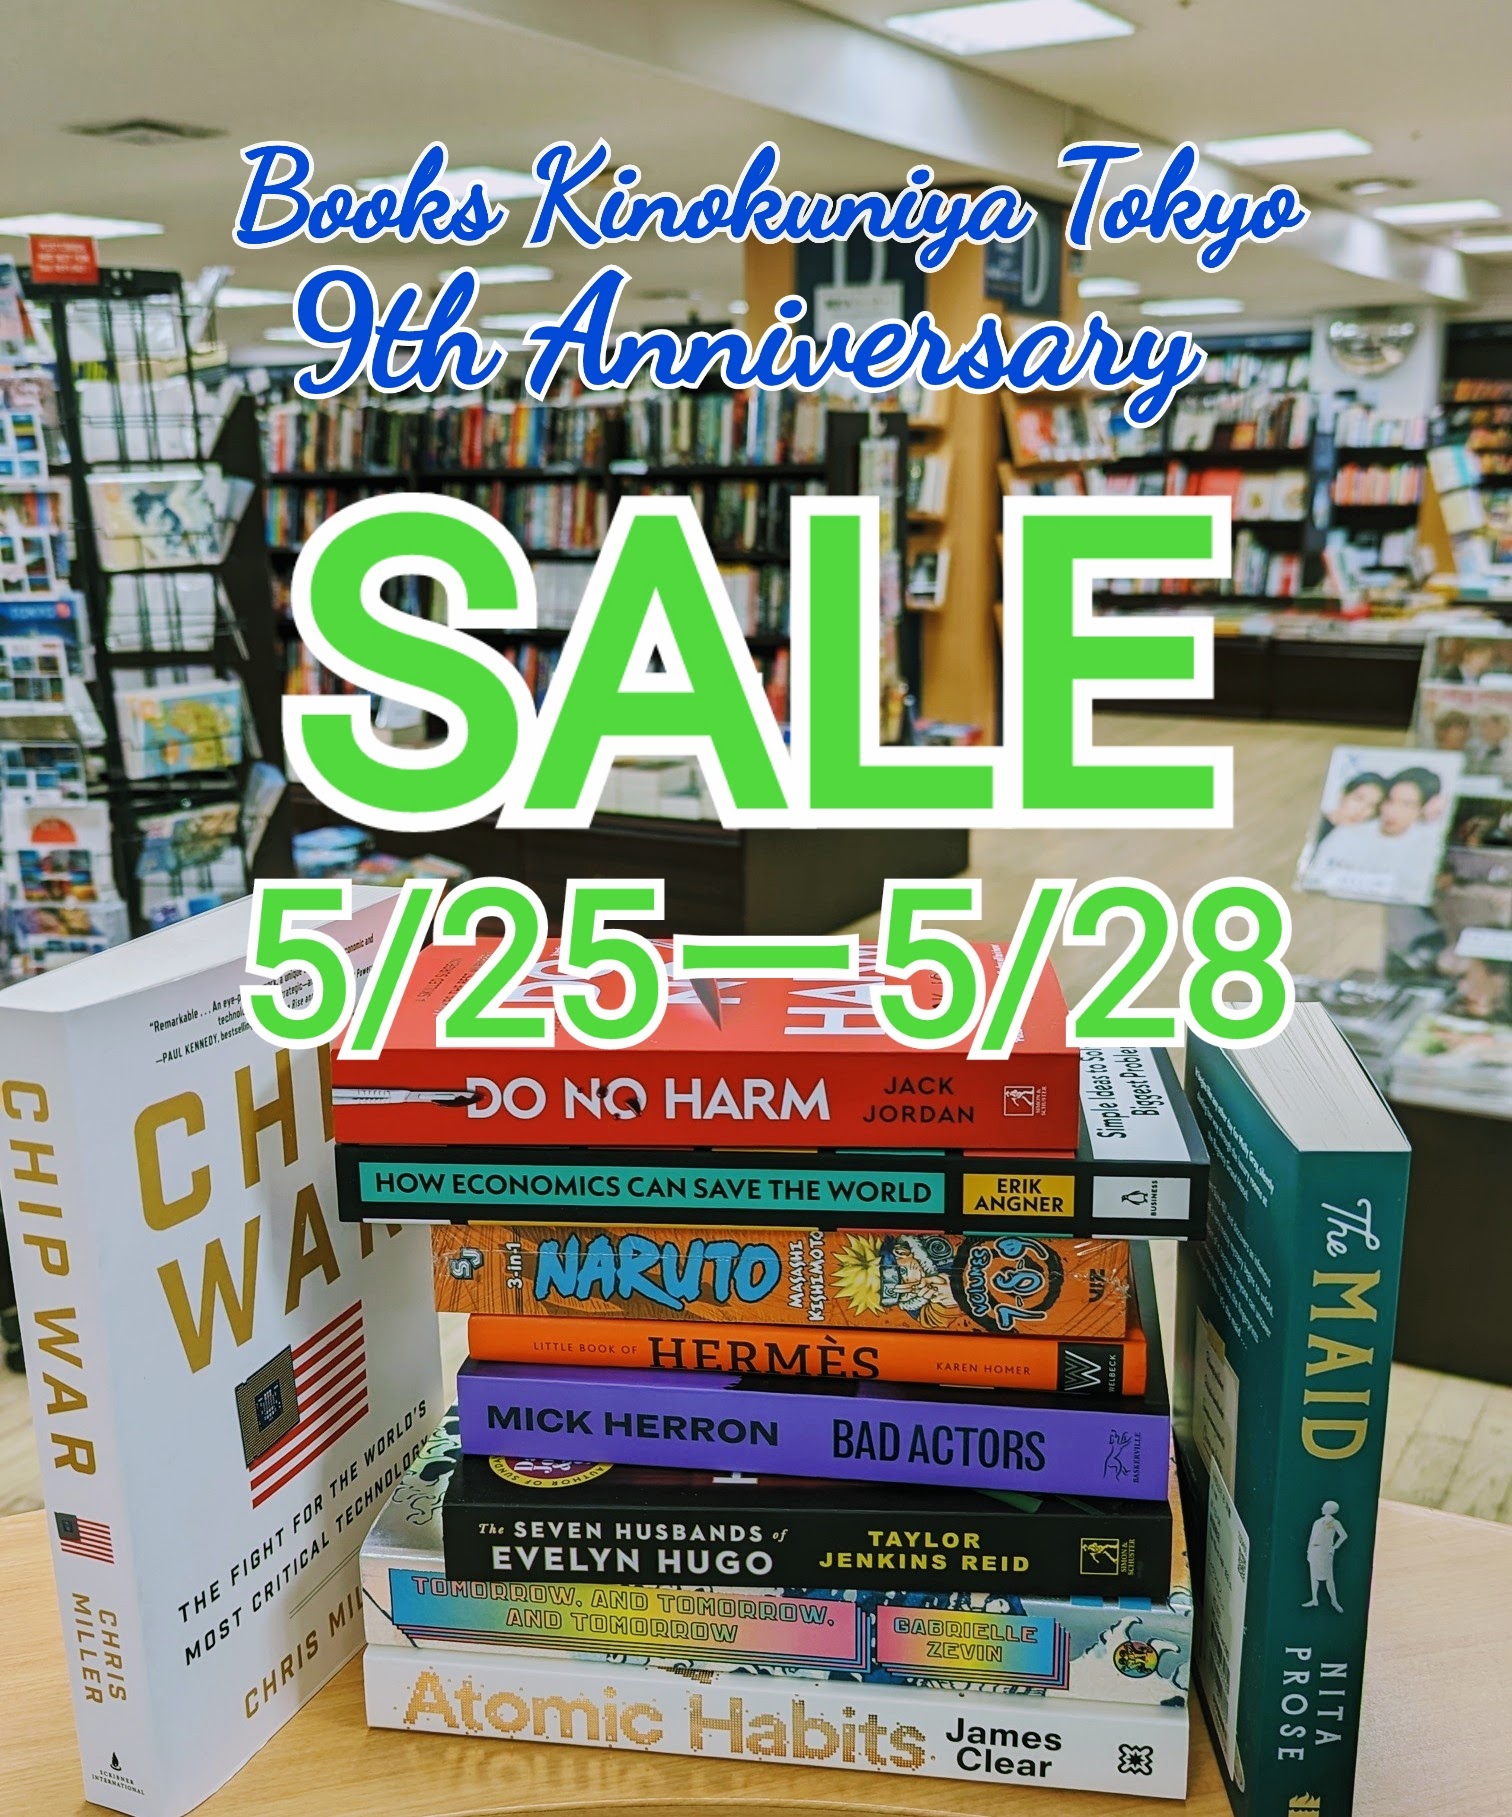 9th Anniversary Sale -20% off Book Sale (May 25-28)